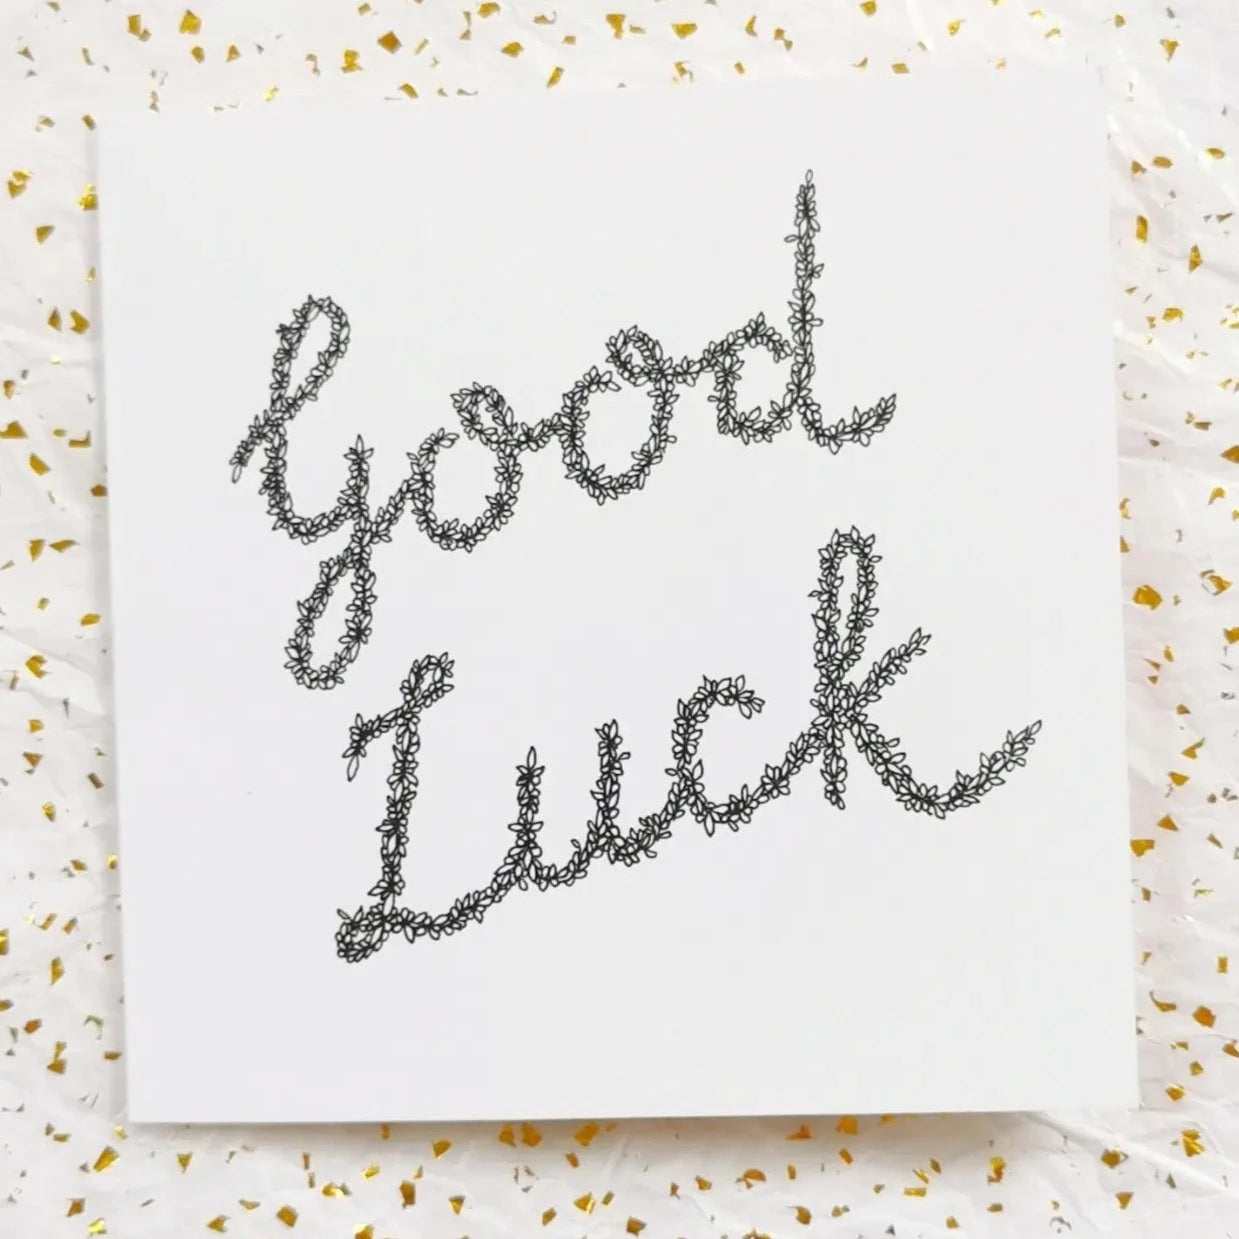 Image shows Good Luck card illustration. Image is made from entirely black and white floral drawings with yellow deigned background. 